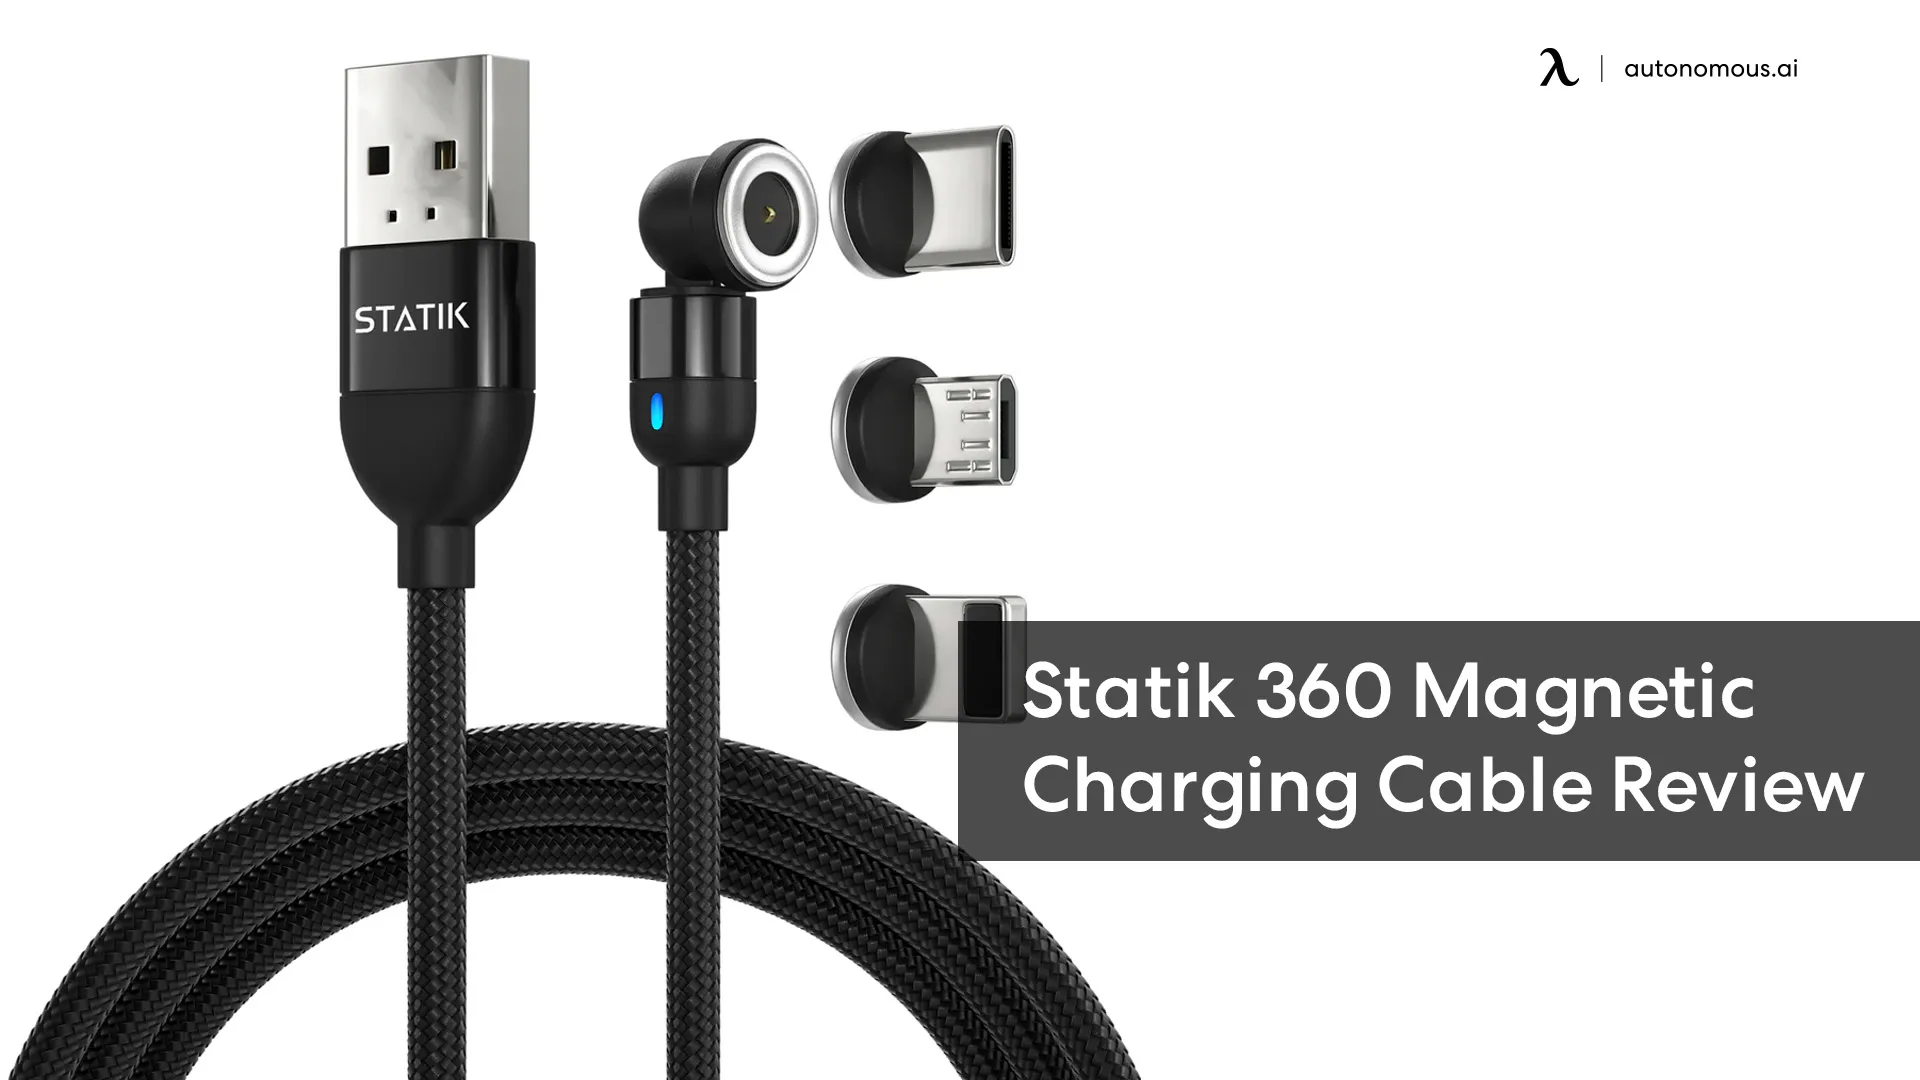 The Power of Ease with Statik 360 Magnetic Charging Cable